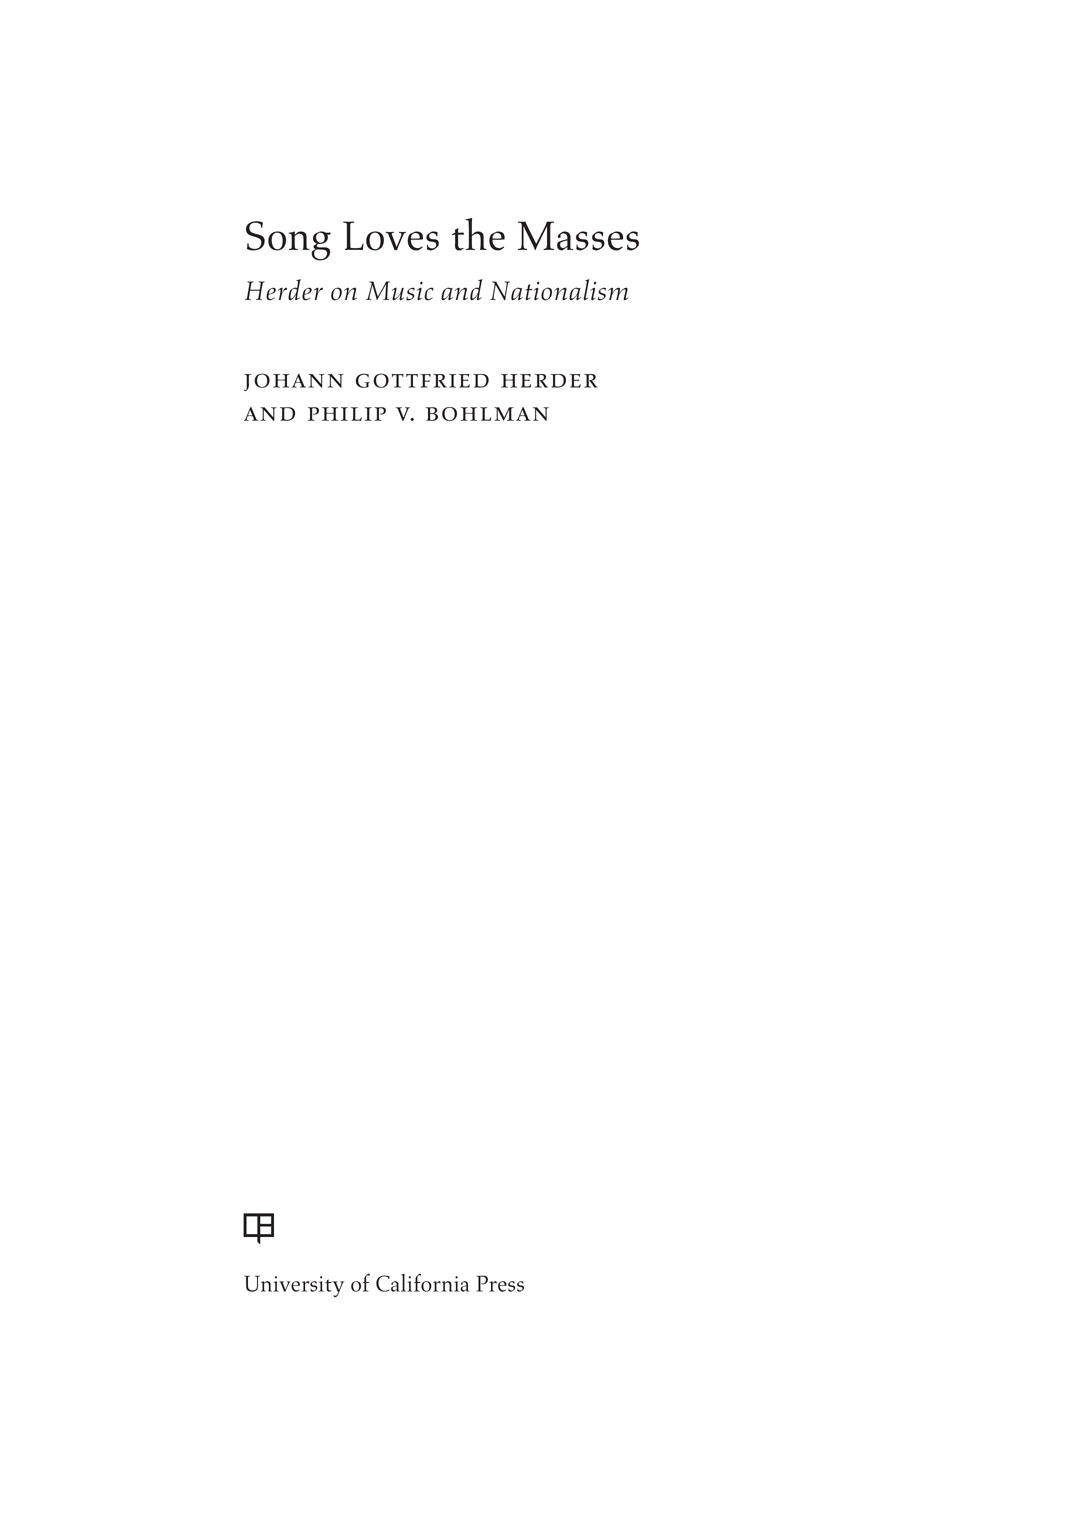 Song Loves the Masses The publisher gratefully acknowledges the John Daverio - photo 1